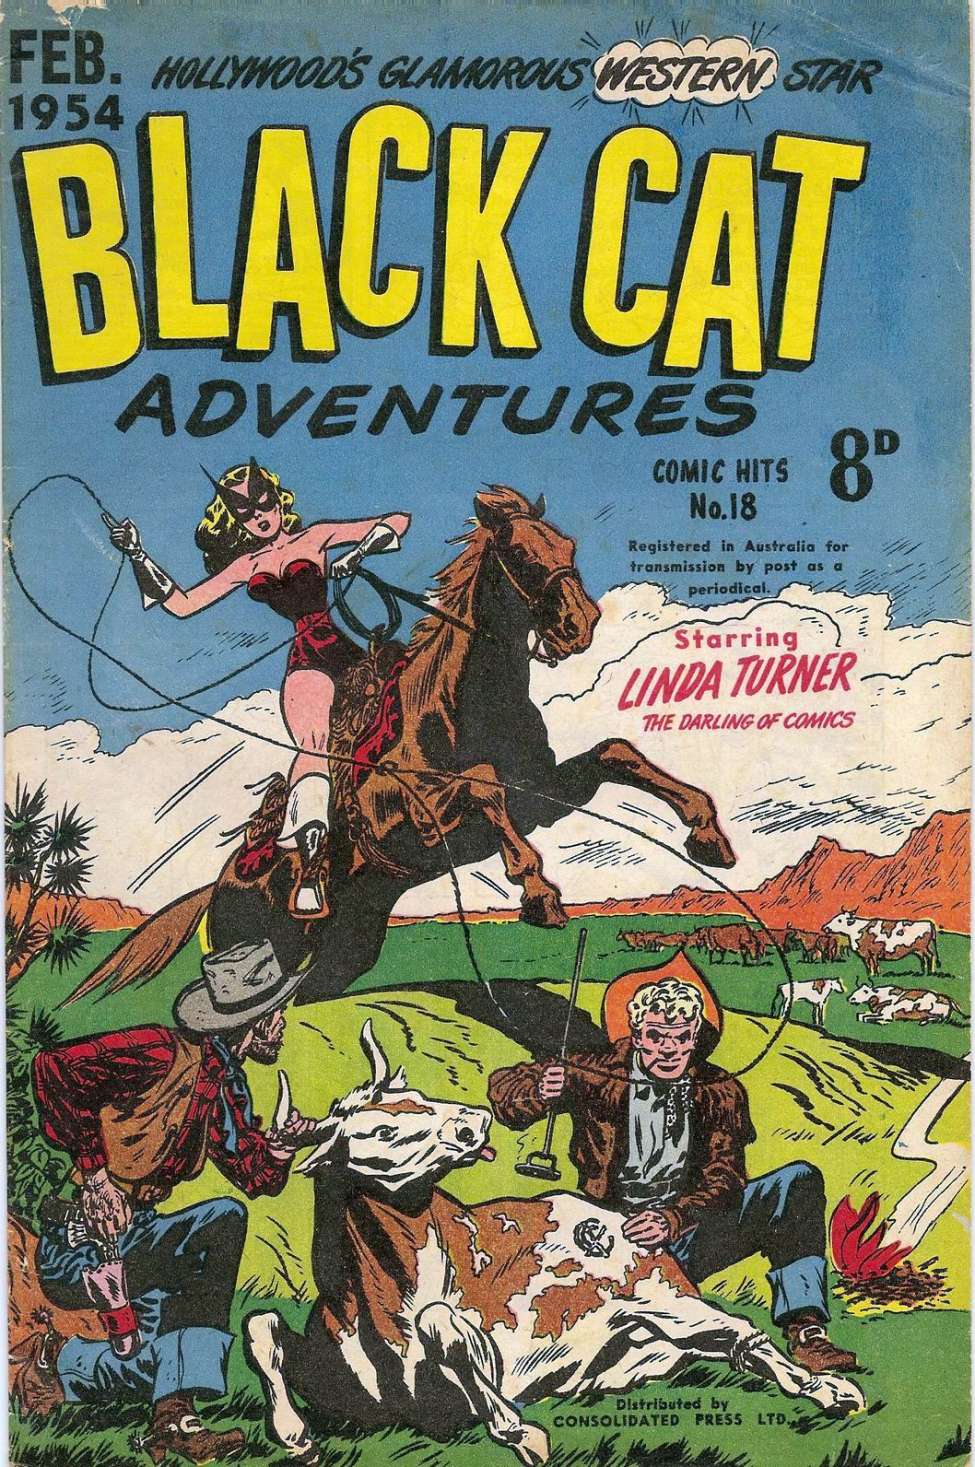 Book Cover For Comic Hits 18 (Black Cat Adventures) - Version 2